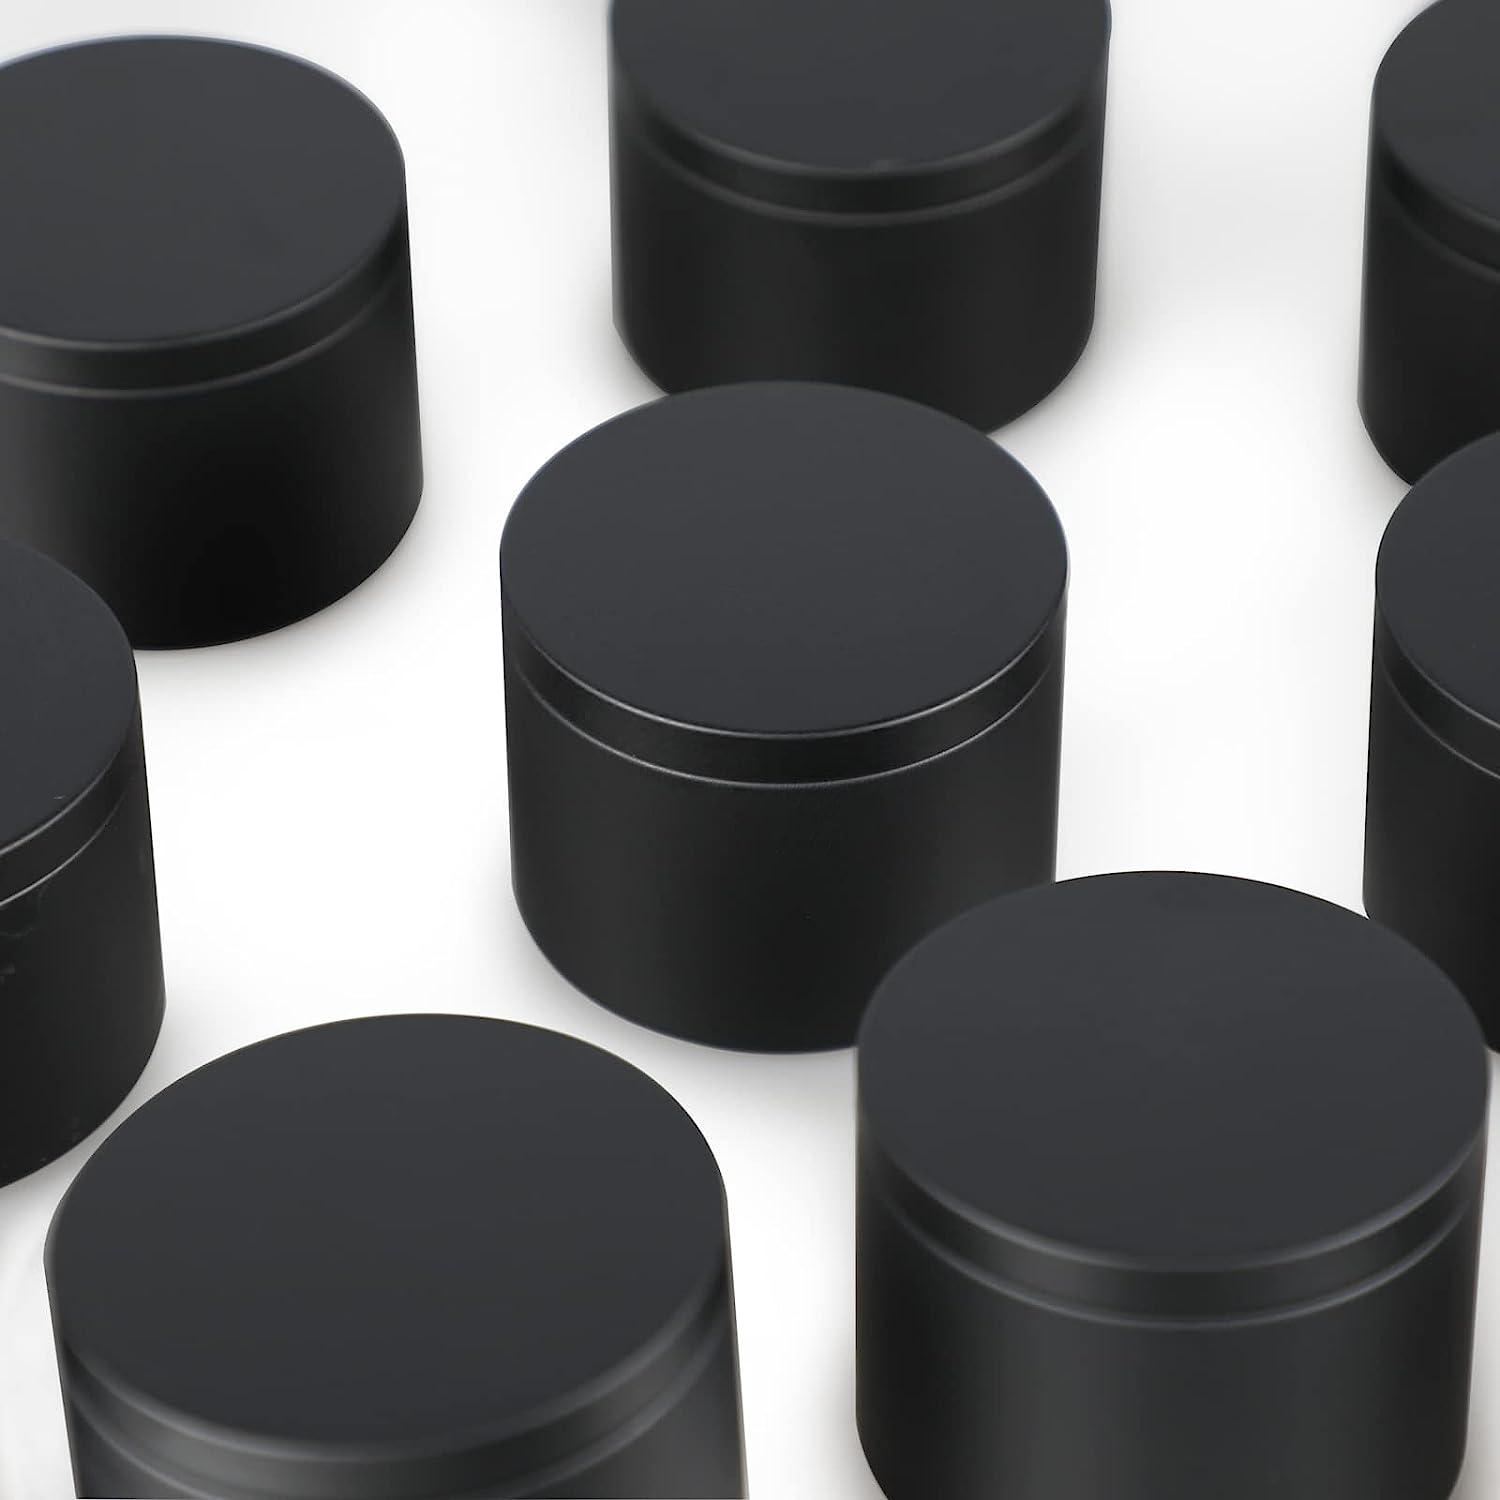 8 oz, 24 Pcs Matte Black Candle Jar with Lids, Empty Metal Candle Container  Round Mold Vessel Supplies for Candle Making, Storage, Christmas Candle